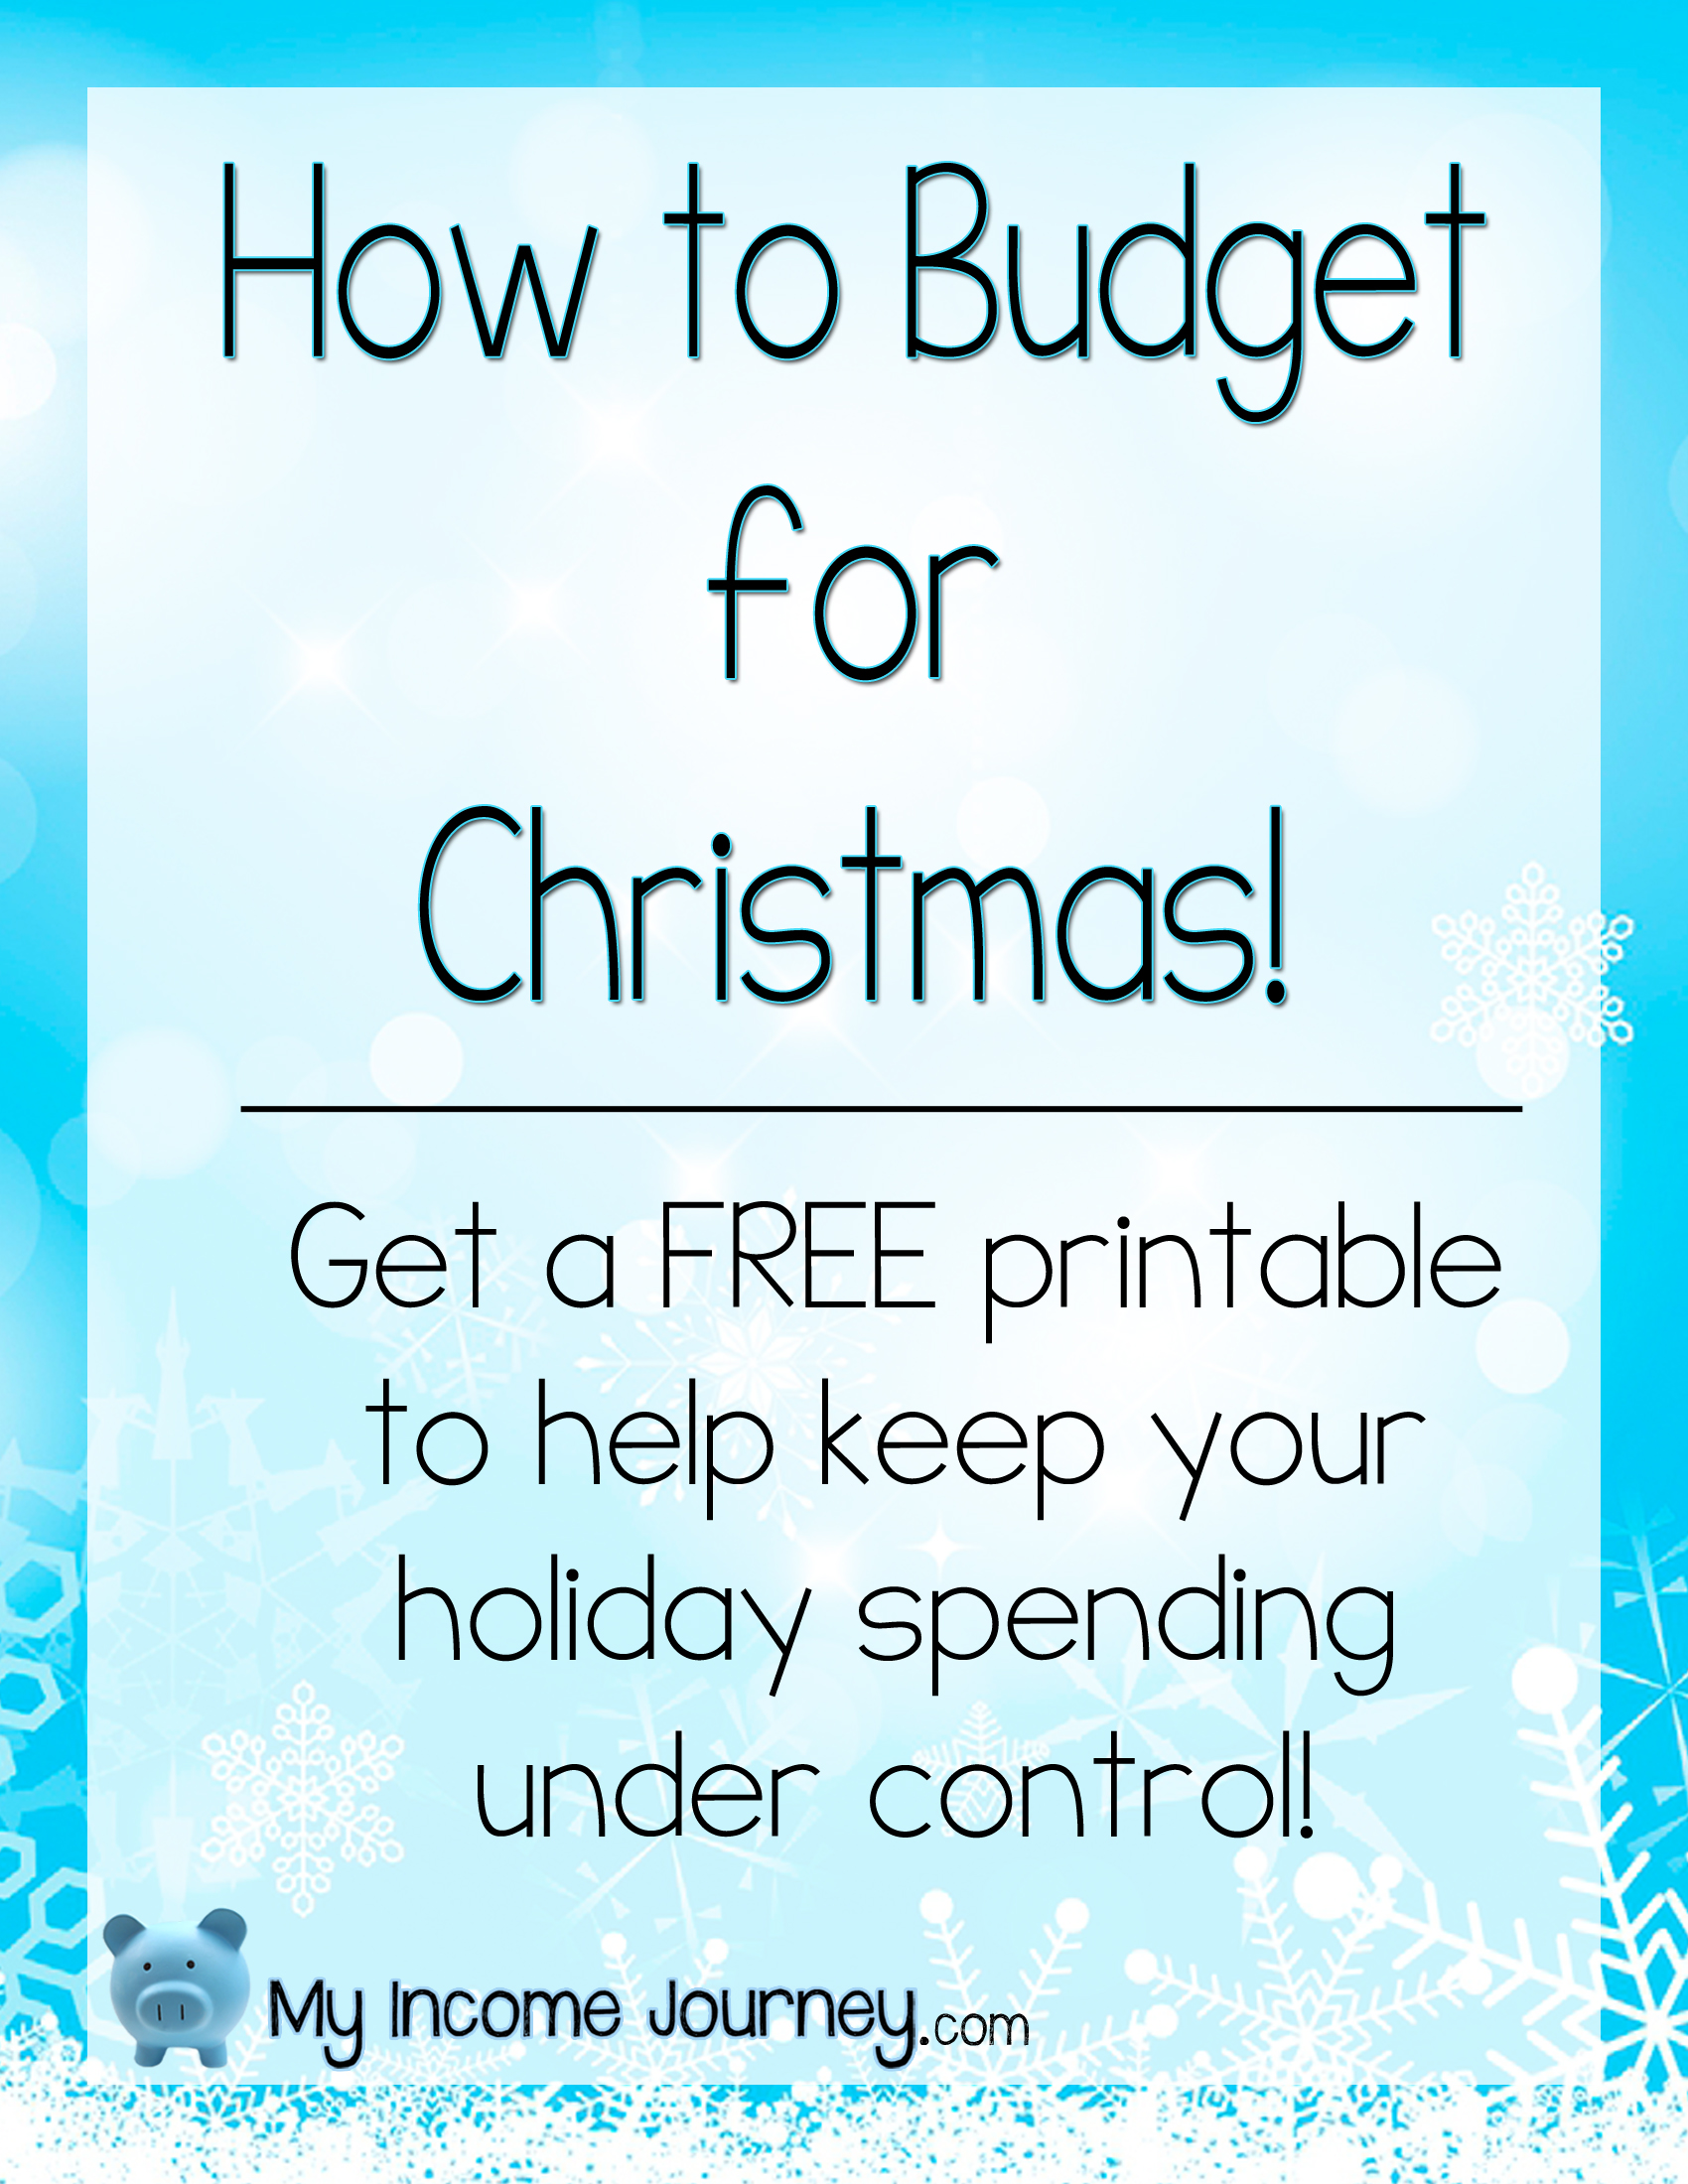 How to Budget for Christmas